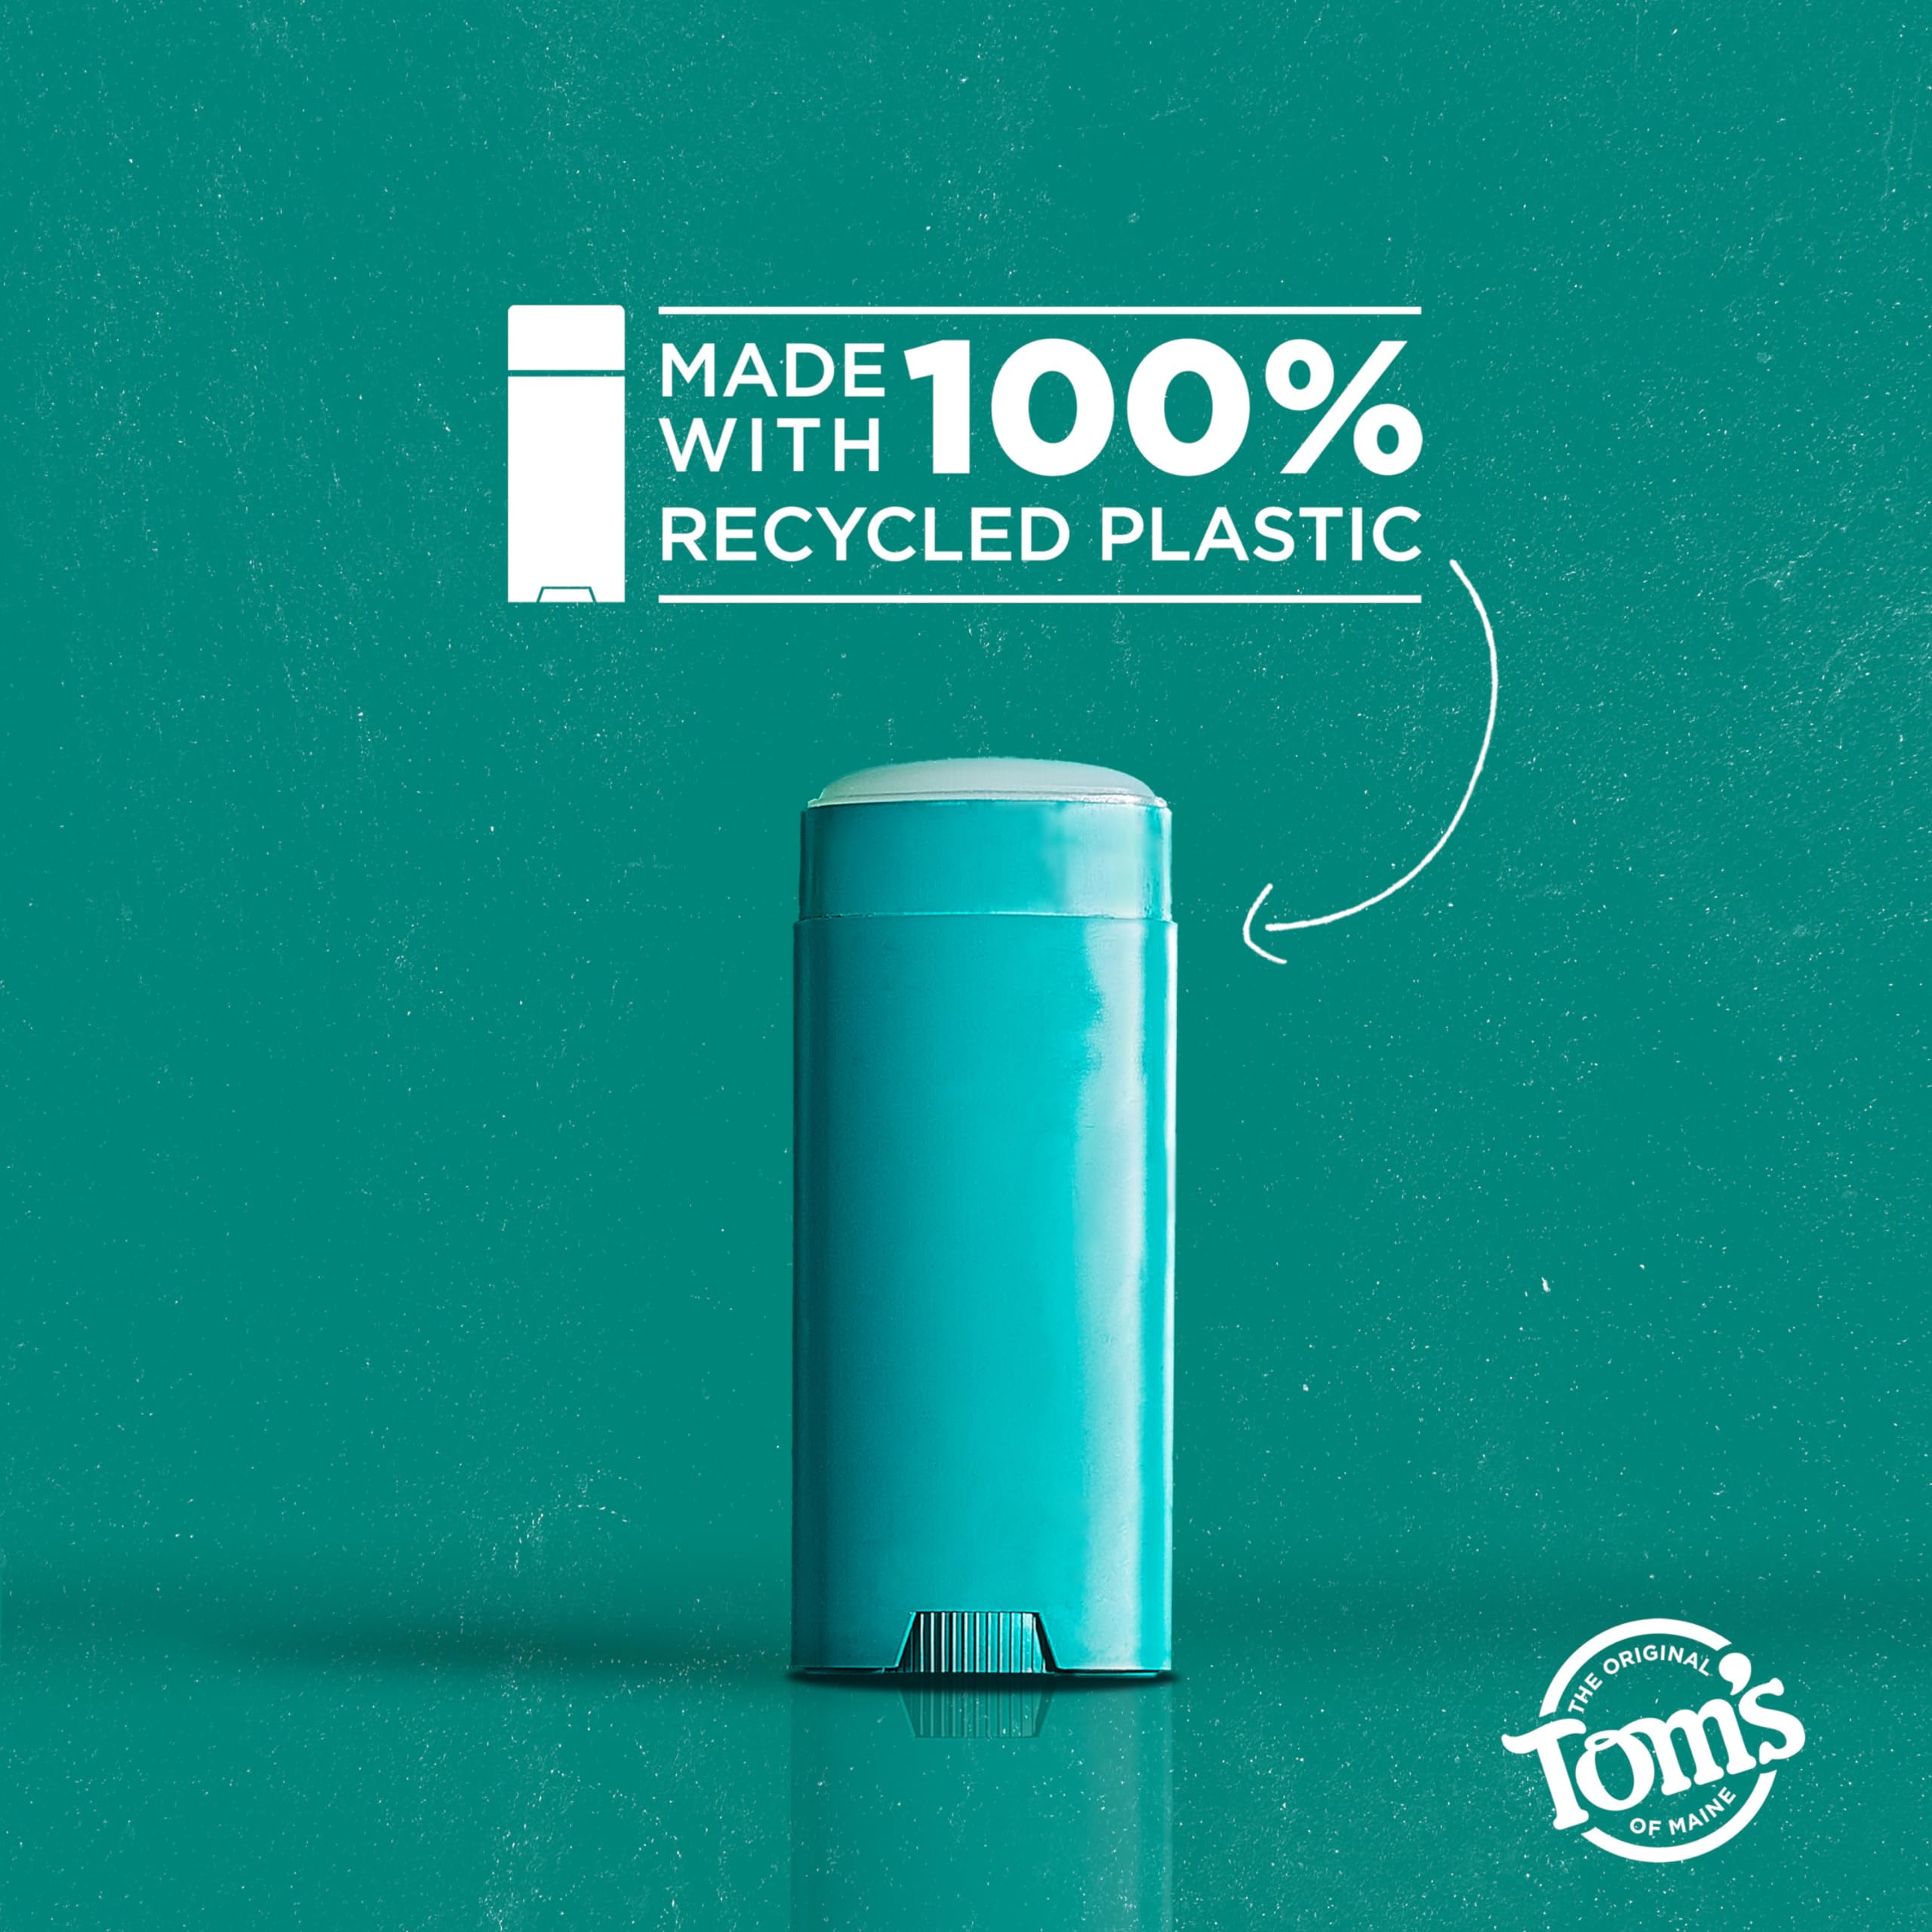 Tom’s of Maine Unscented Natural Deodorant for Women and Men, Aluminum Free, 3.25 oz